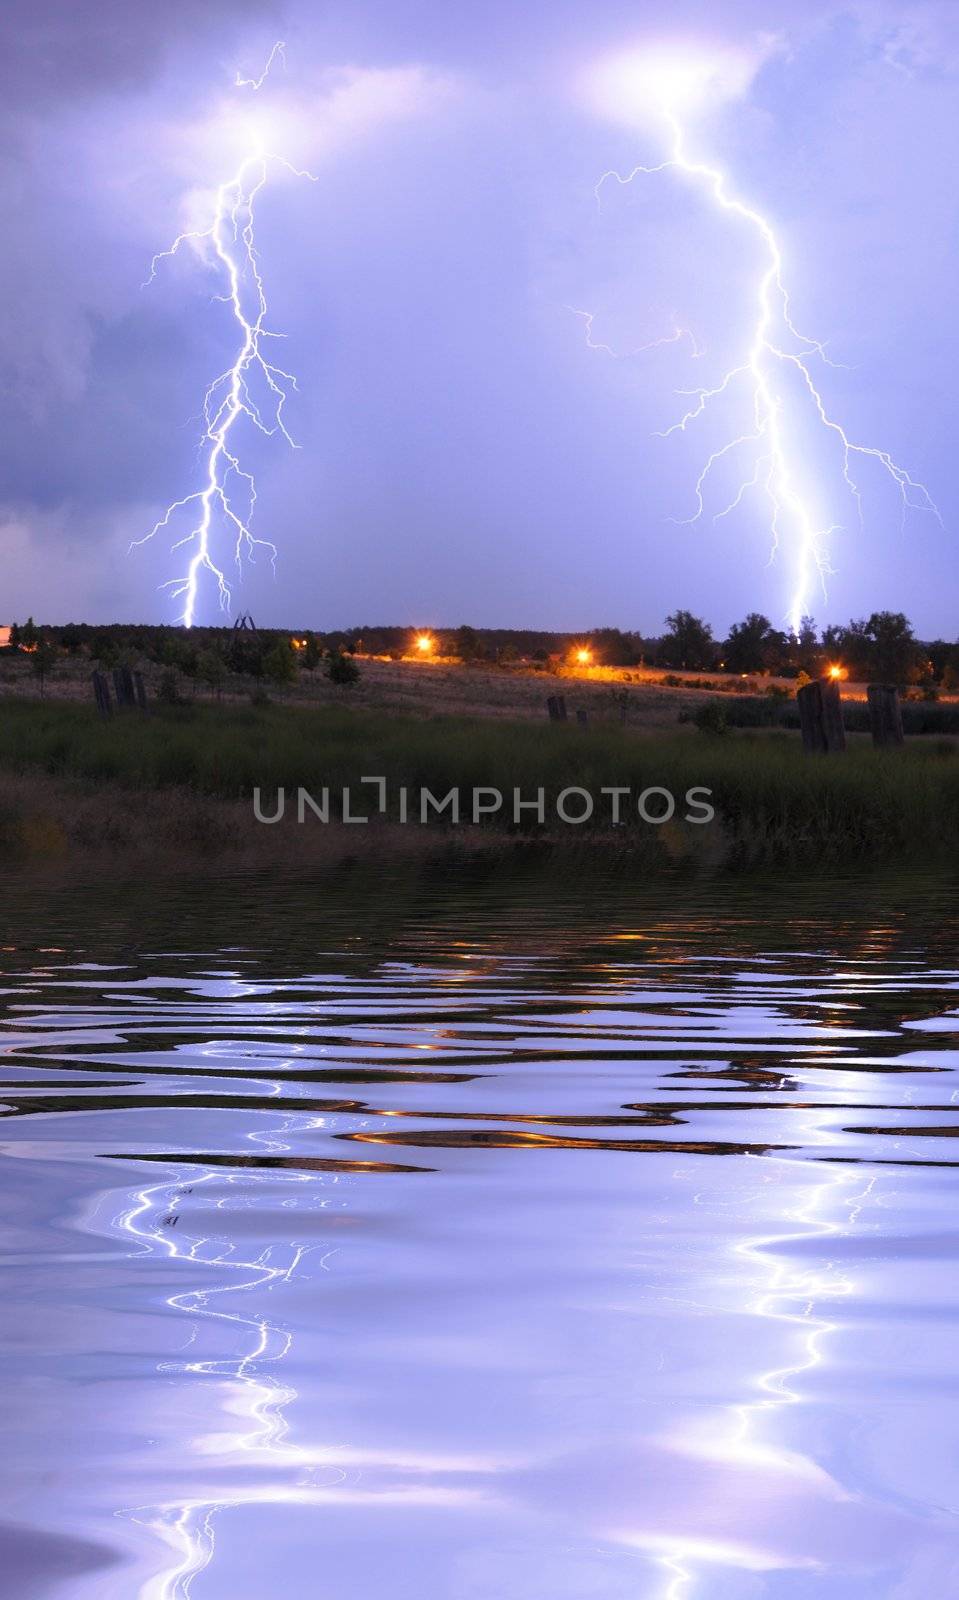 thunderstorm with lightnings and cloudy sky at rainy night